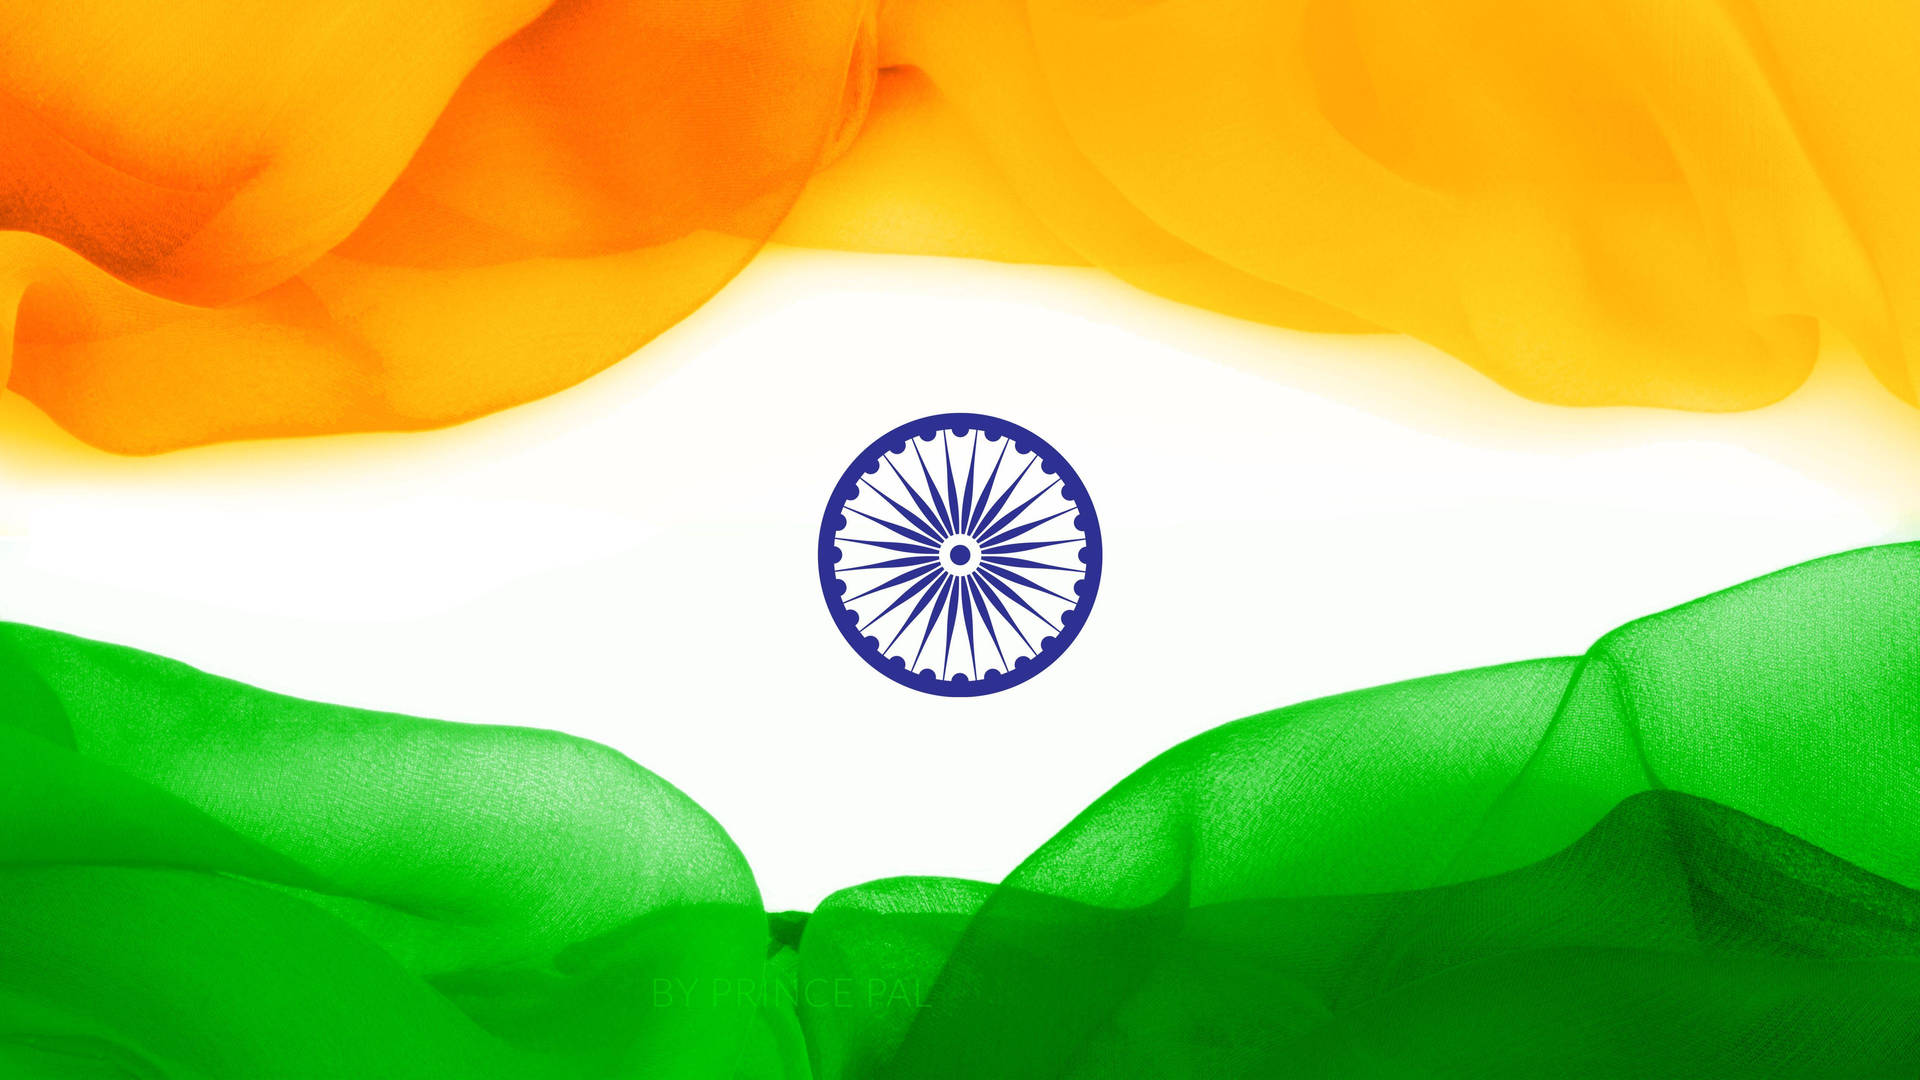 Indian Flag Hd In Flowing Abstract Picture